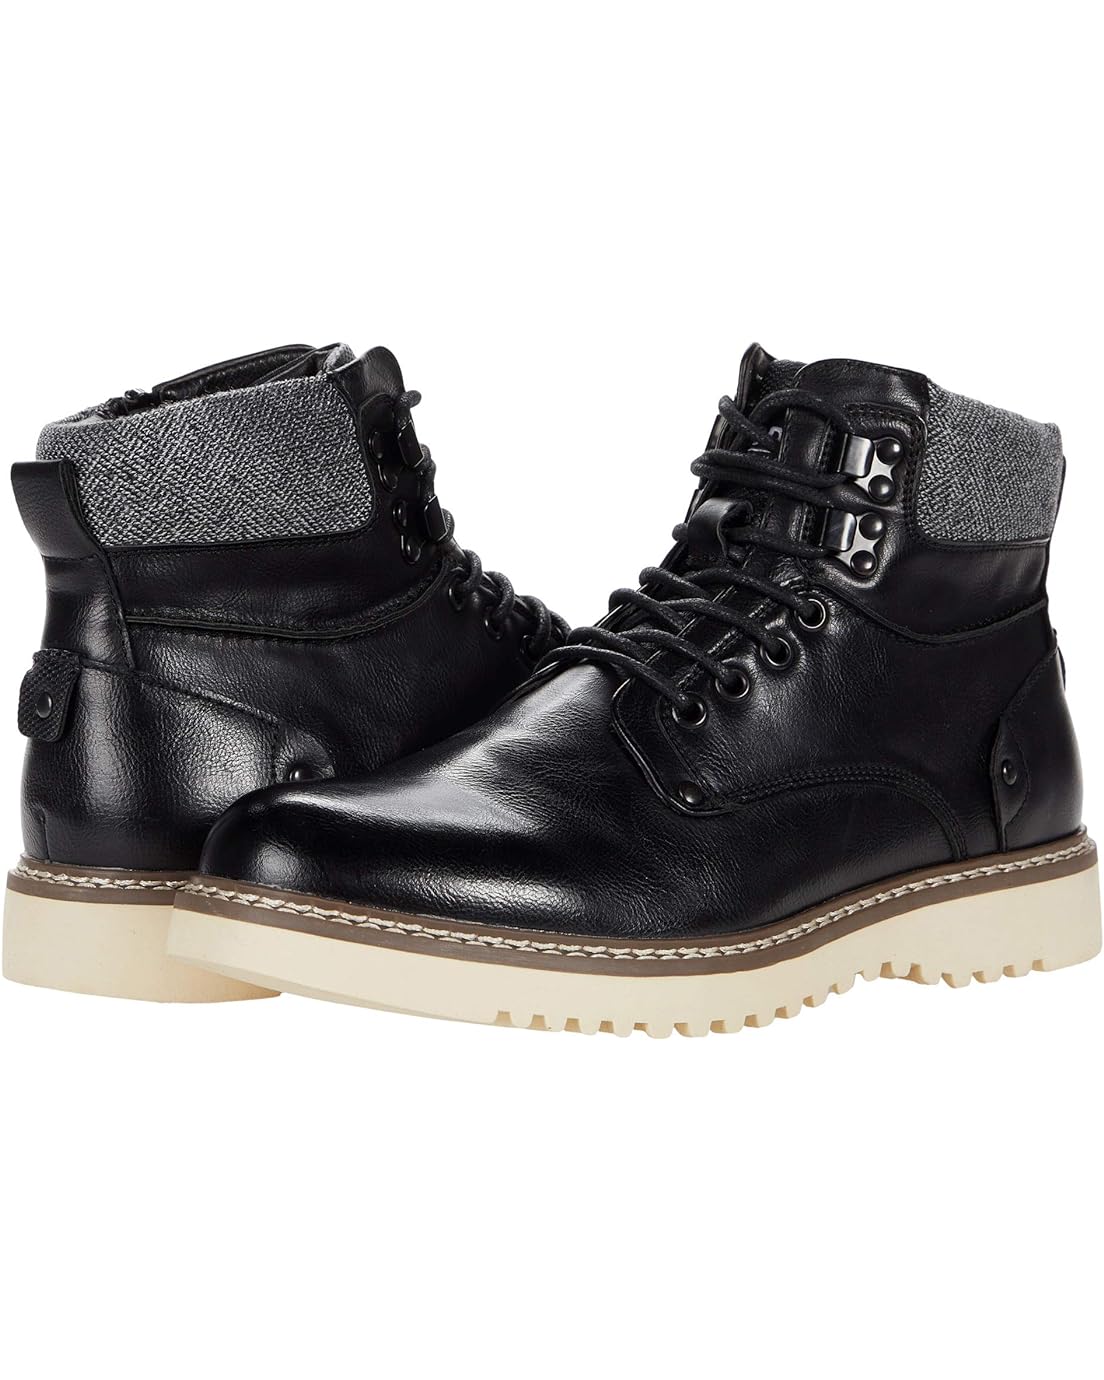 Steve Madden Delwar Lace-Up Boot